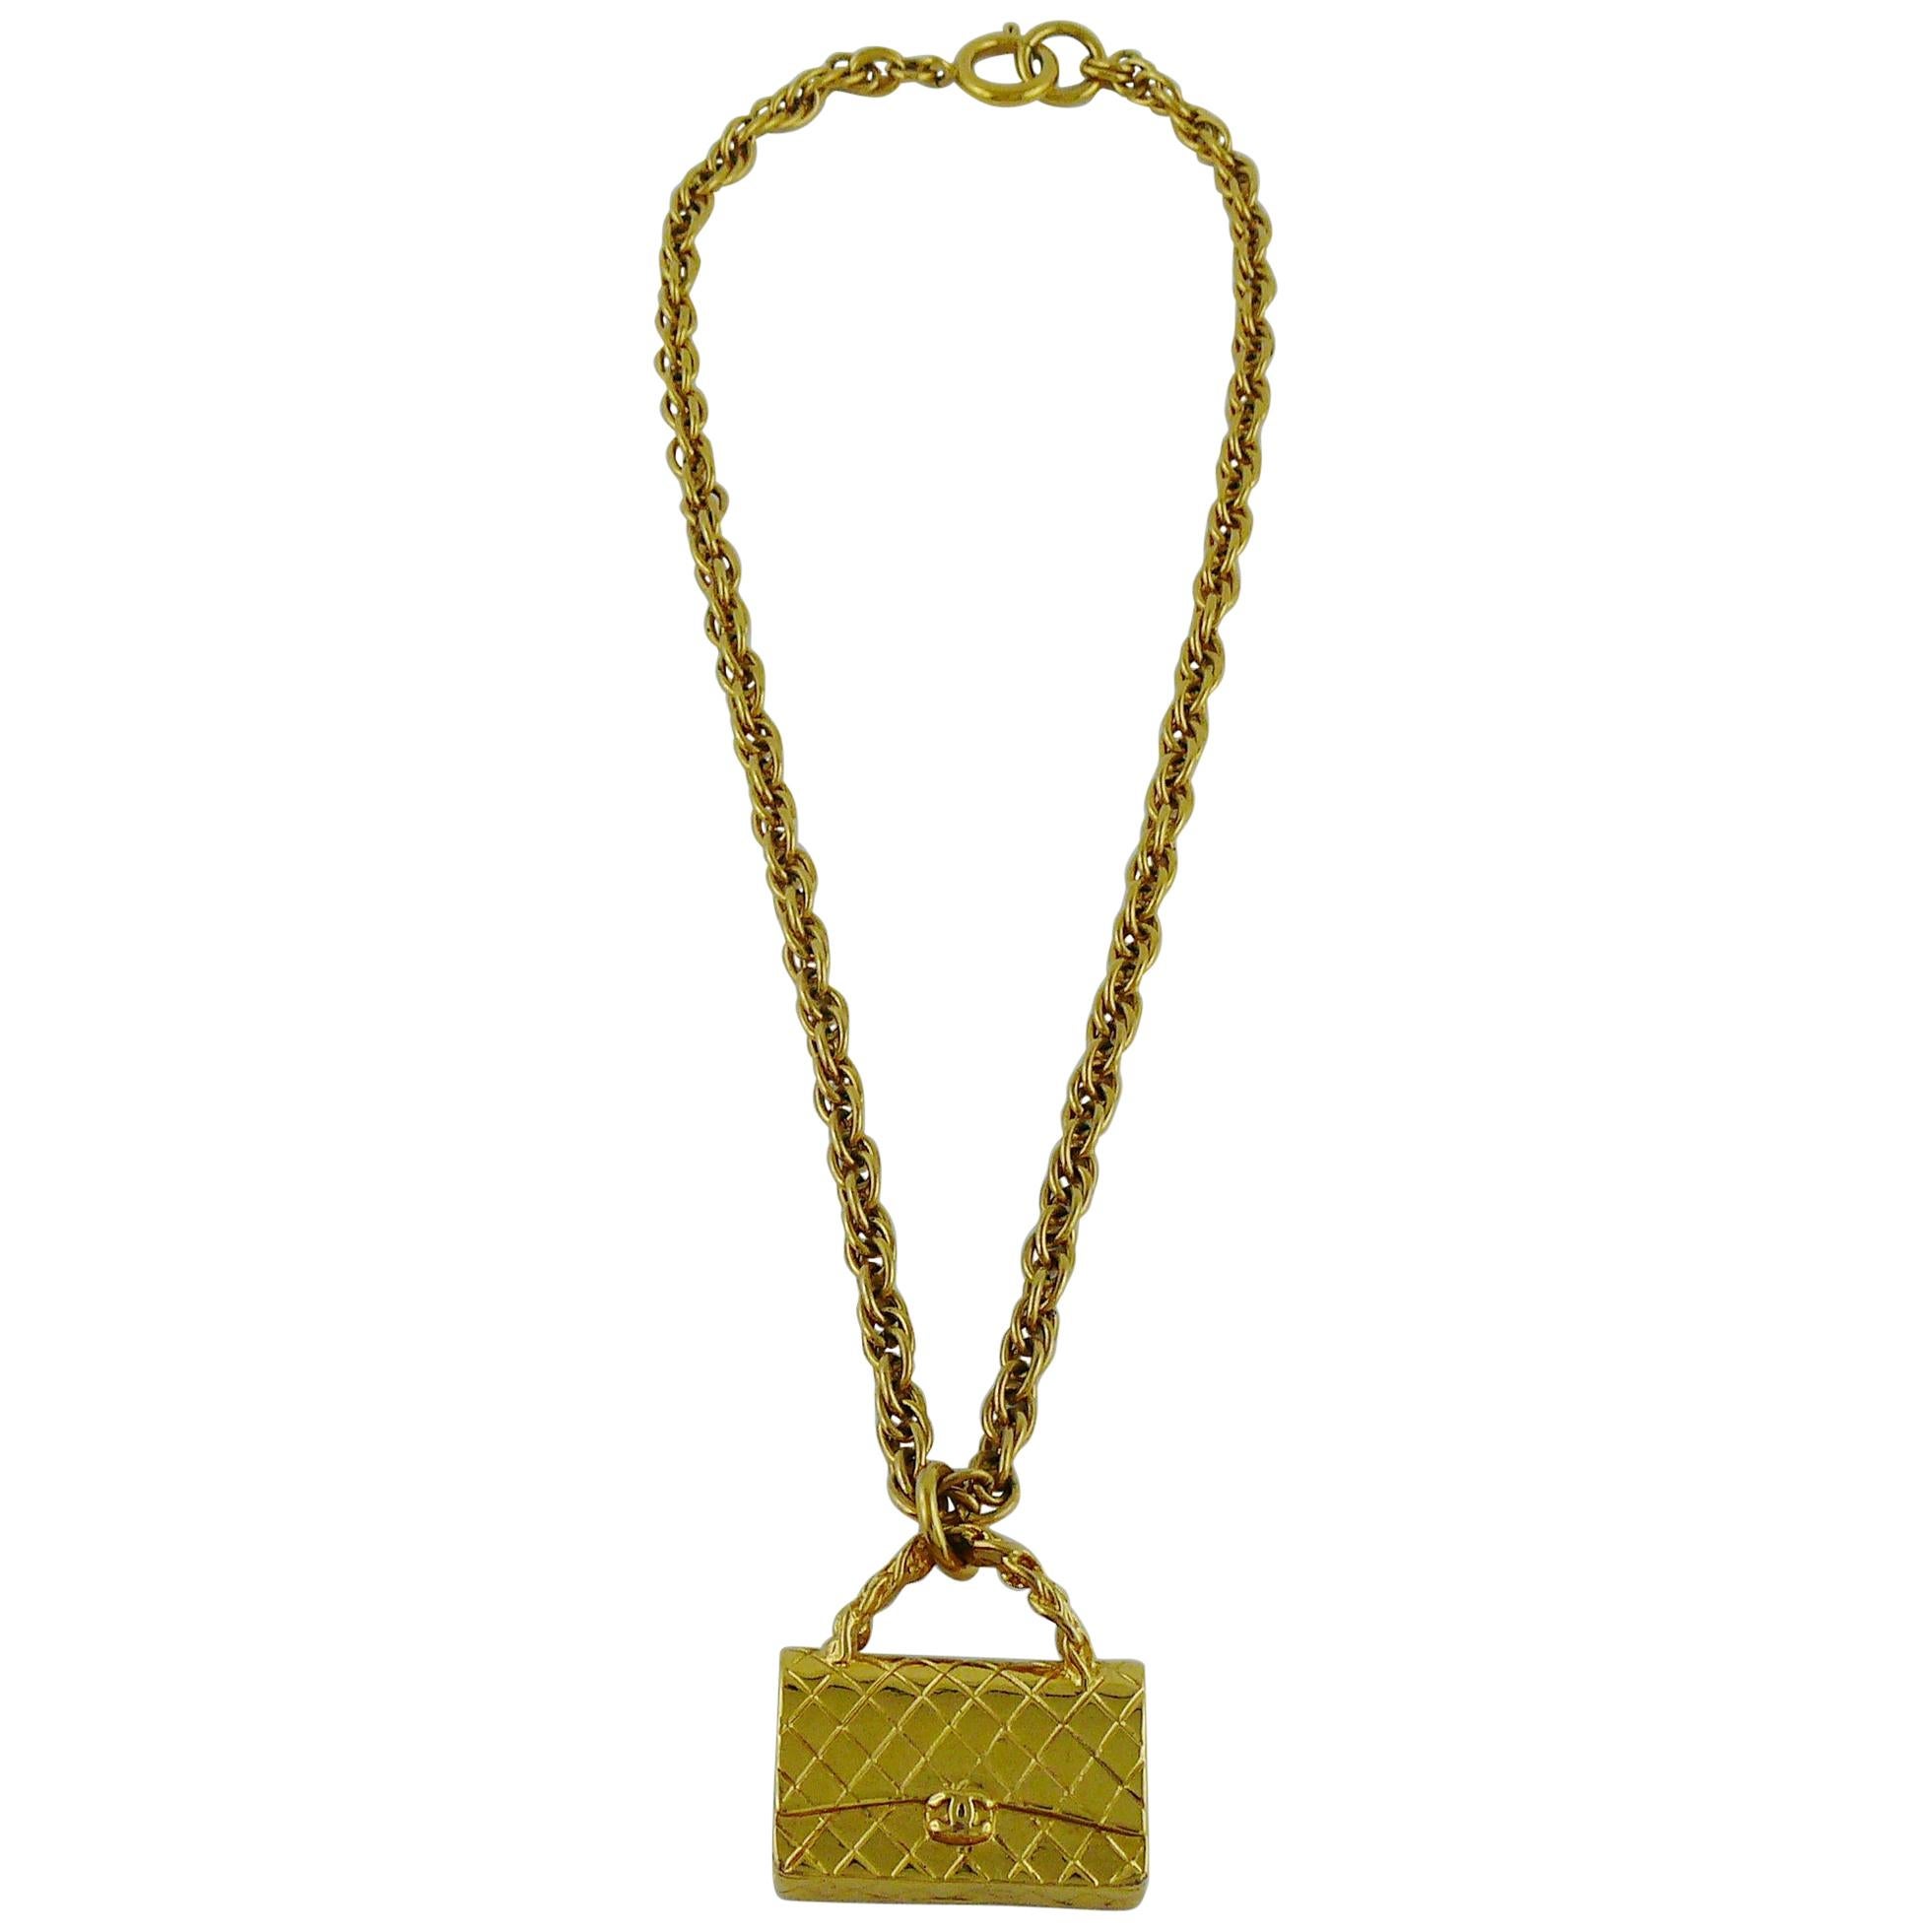 Chanel Vintage Gold Toned Quilted Bag Pendant Chain Necklace